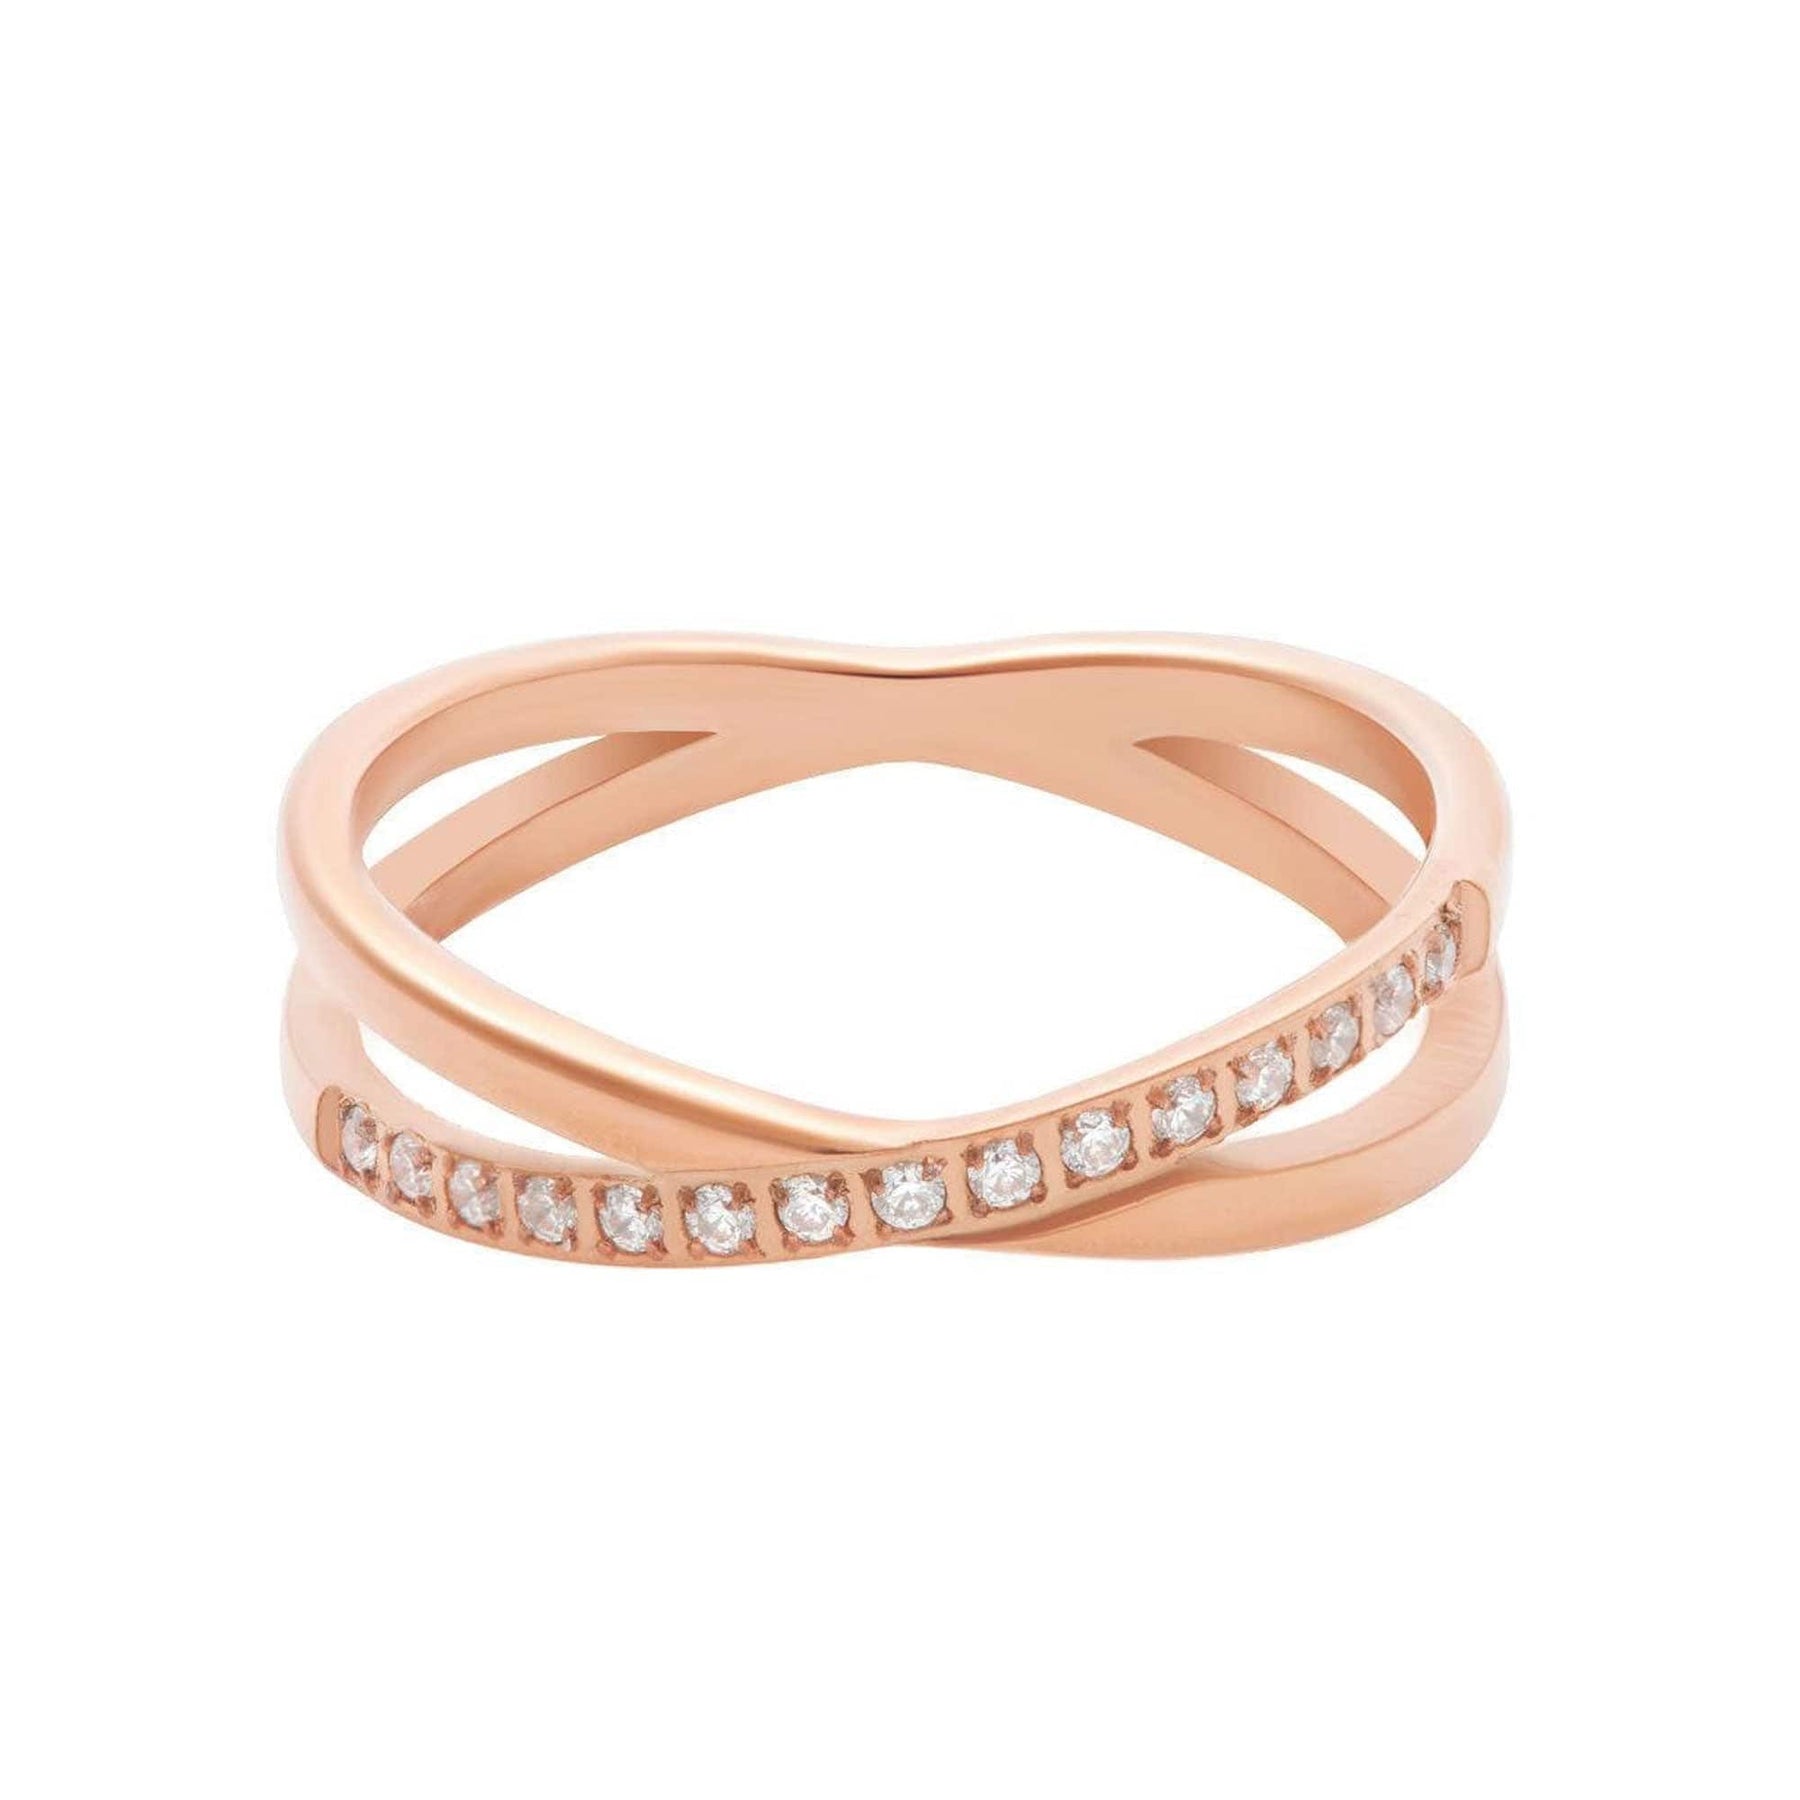 BohoMoon Stainless Steel Mist Ring Rose Gold / US 5 / UK J / EUR 49 (x small)